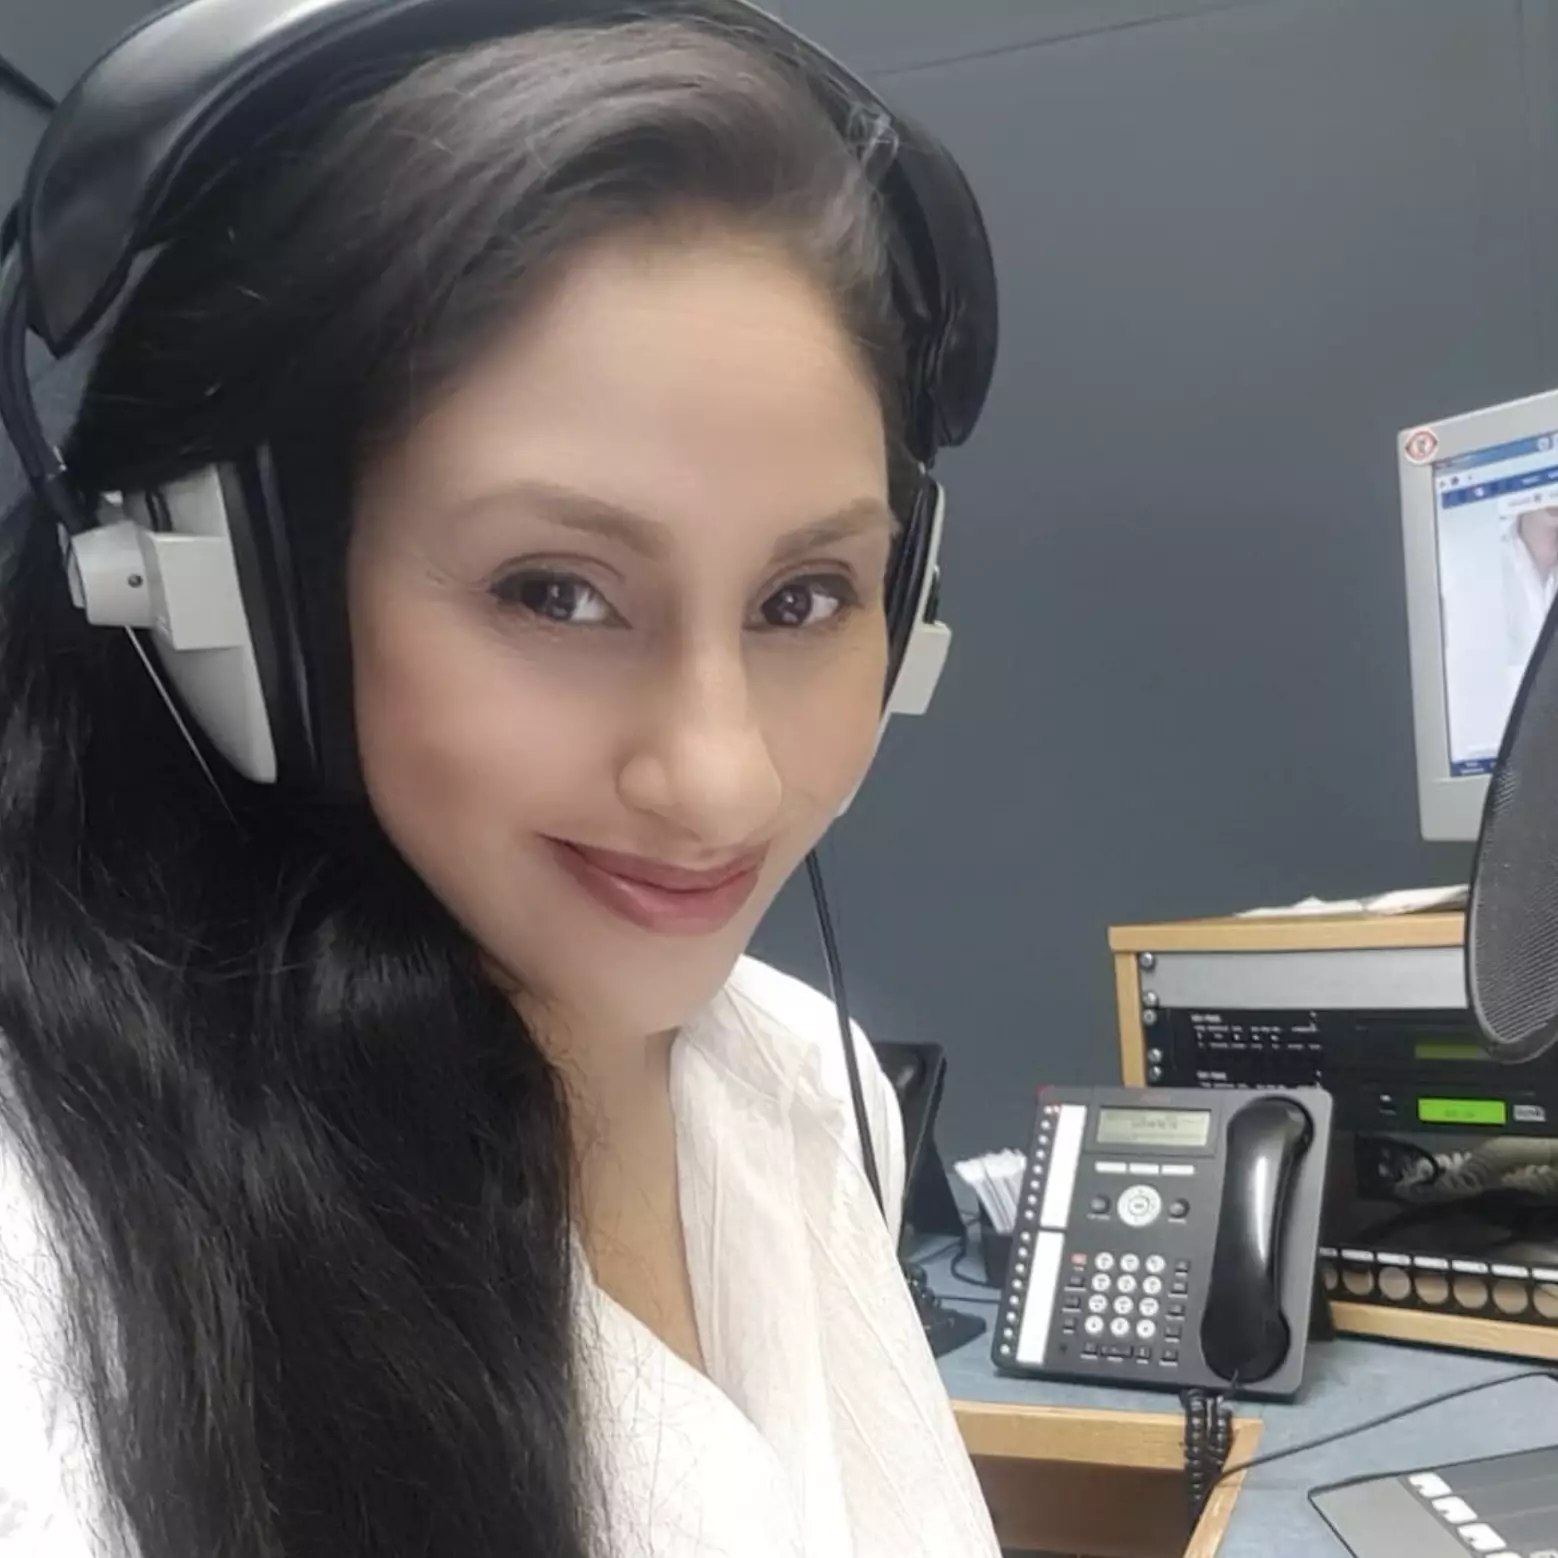 Kirat Assi, who works as a radio presenter, was duped for a decade by her younger cousin.